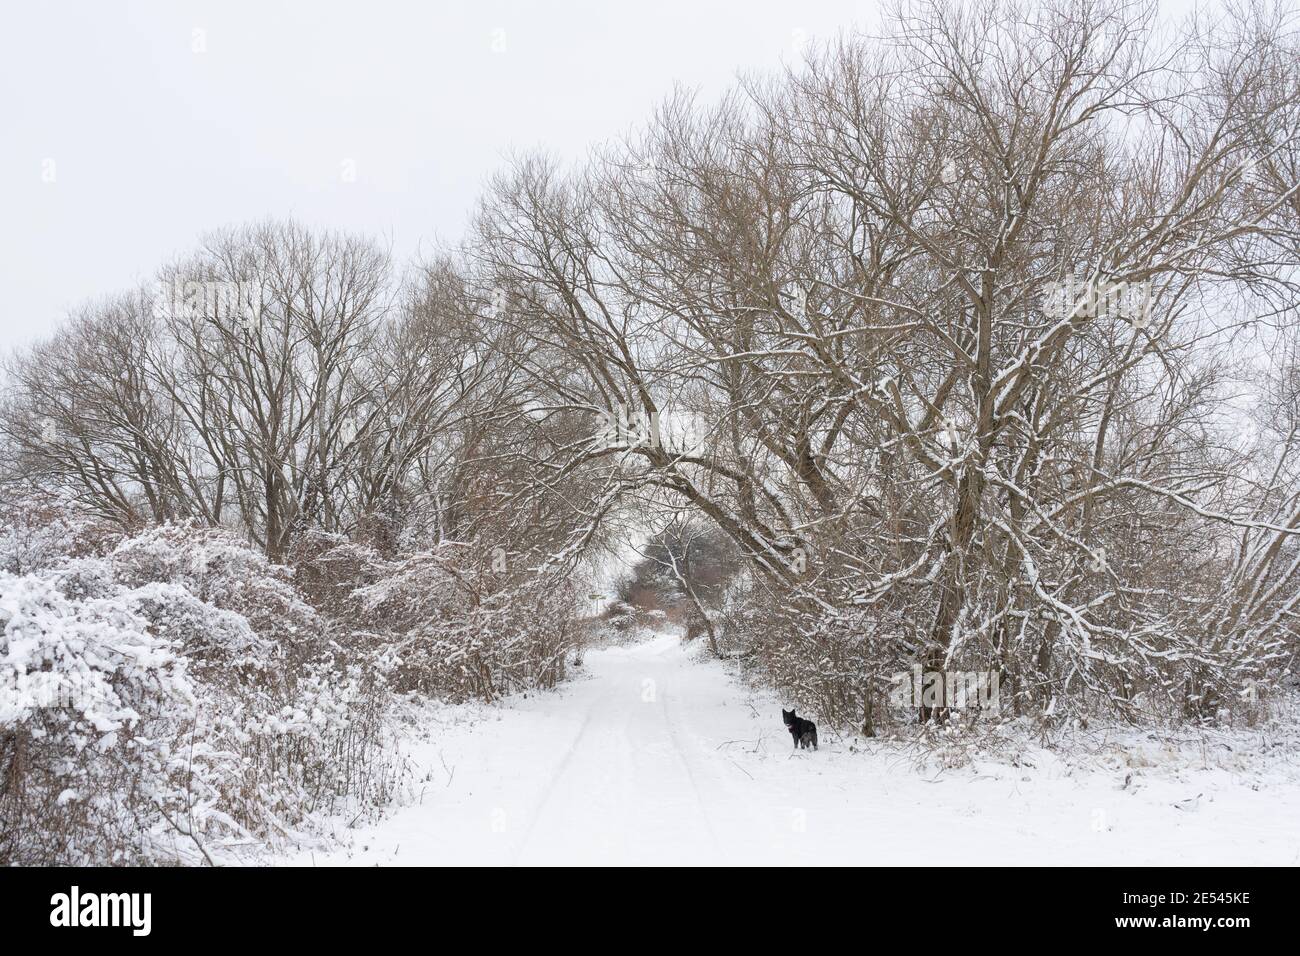 Rural winter road with snow and a black dog, near Bakonyszucs a small touristic town located in the Bakony mountain range in Hungary (2021 January) Stock Photo